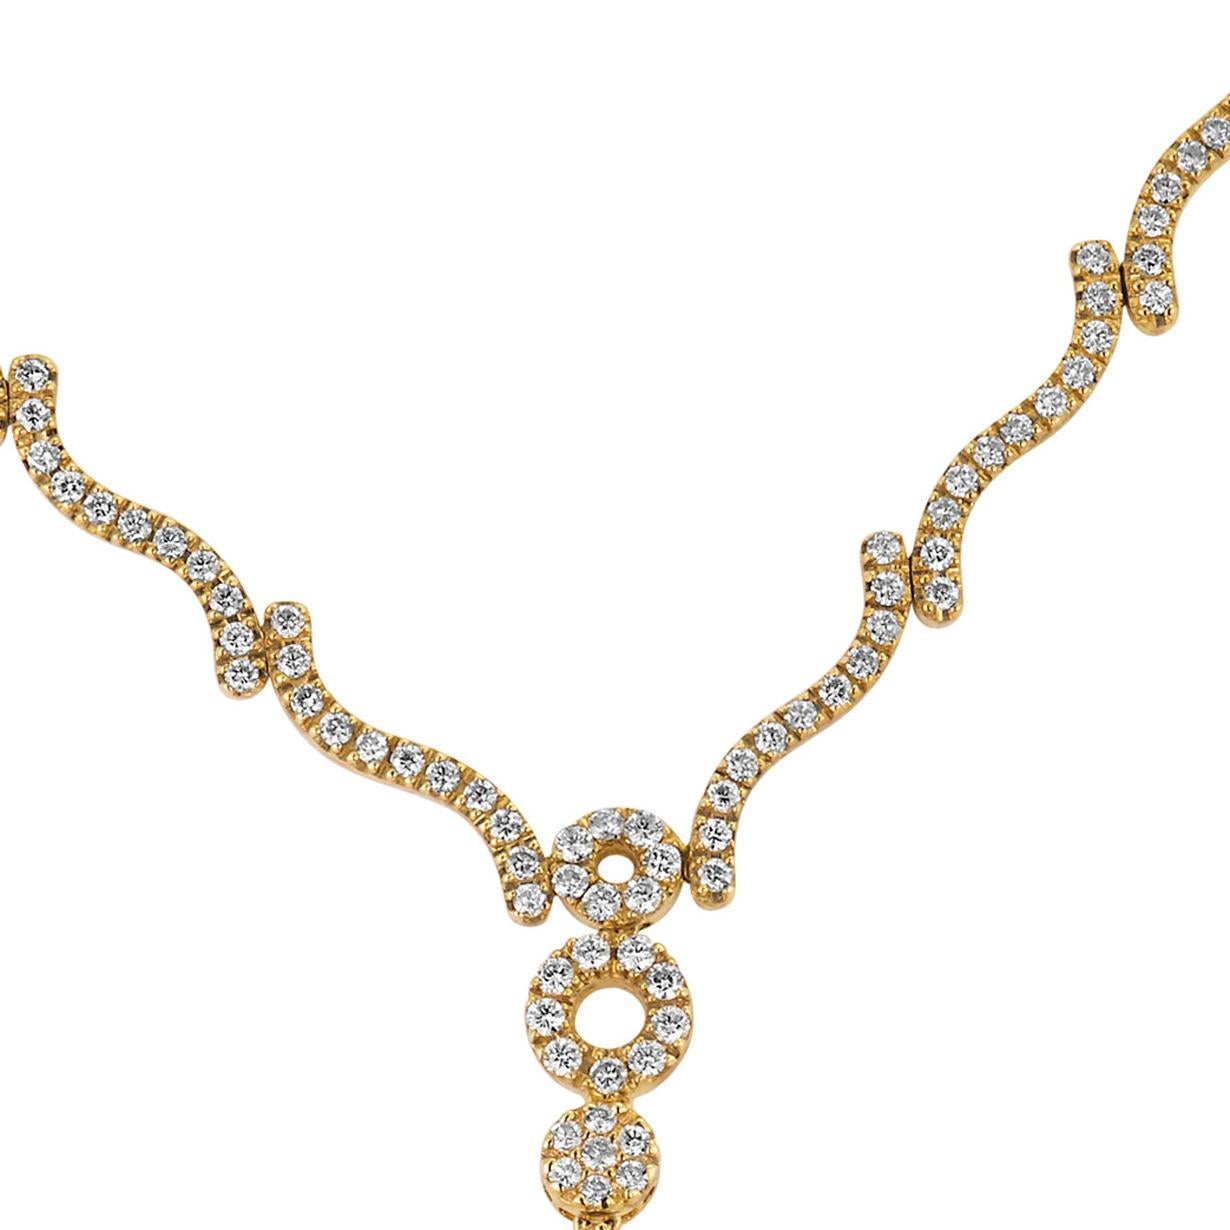 18 Karat Yellow Gold Drop Necklace Featuring A 12.83 Carat Pear Cut Orange Citrine Enhanced By 246 Round Diamonds Totaling 1.97 Carats. 